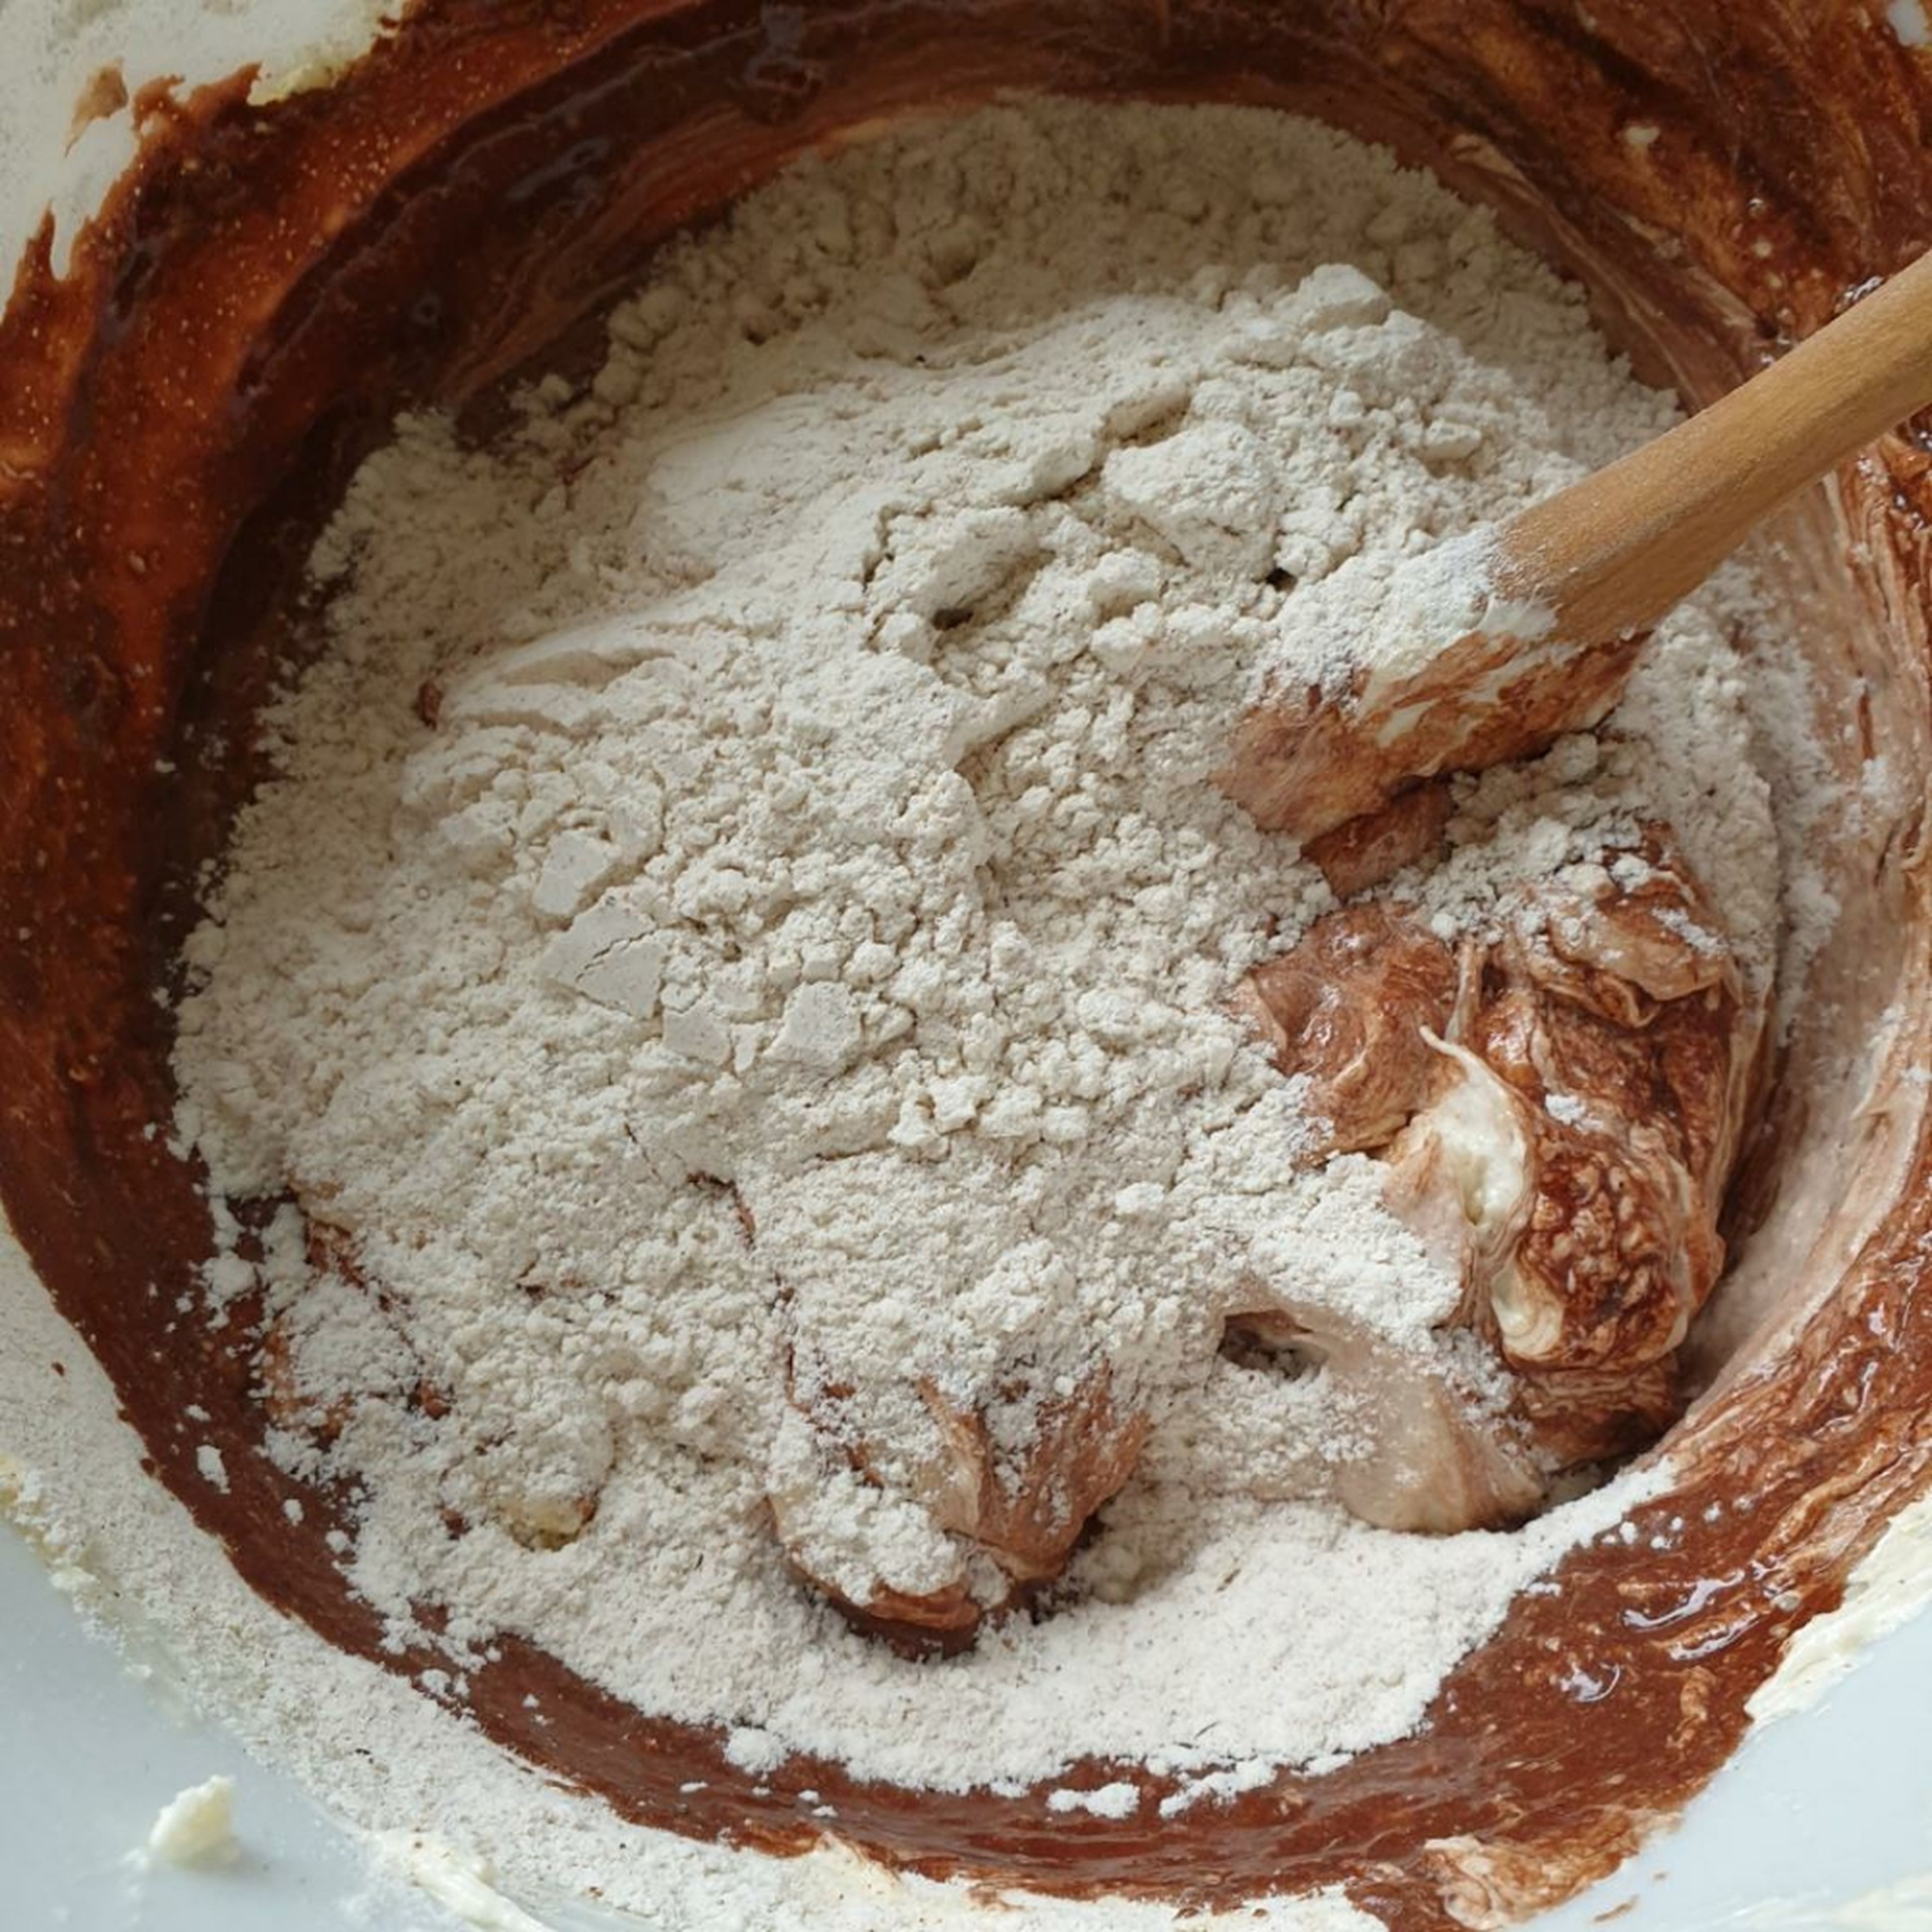 Alternatively add spoonfuls of the flour mixture and dissolved cocoa into the cake batter and combine well.